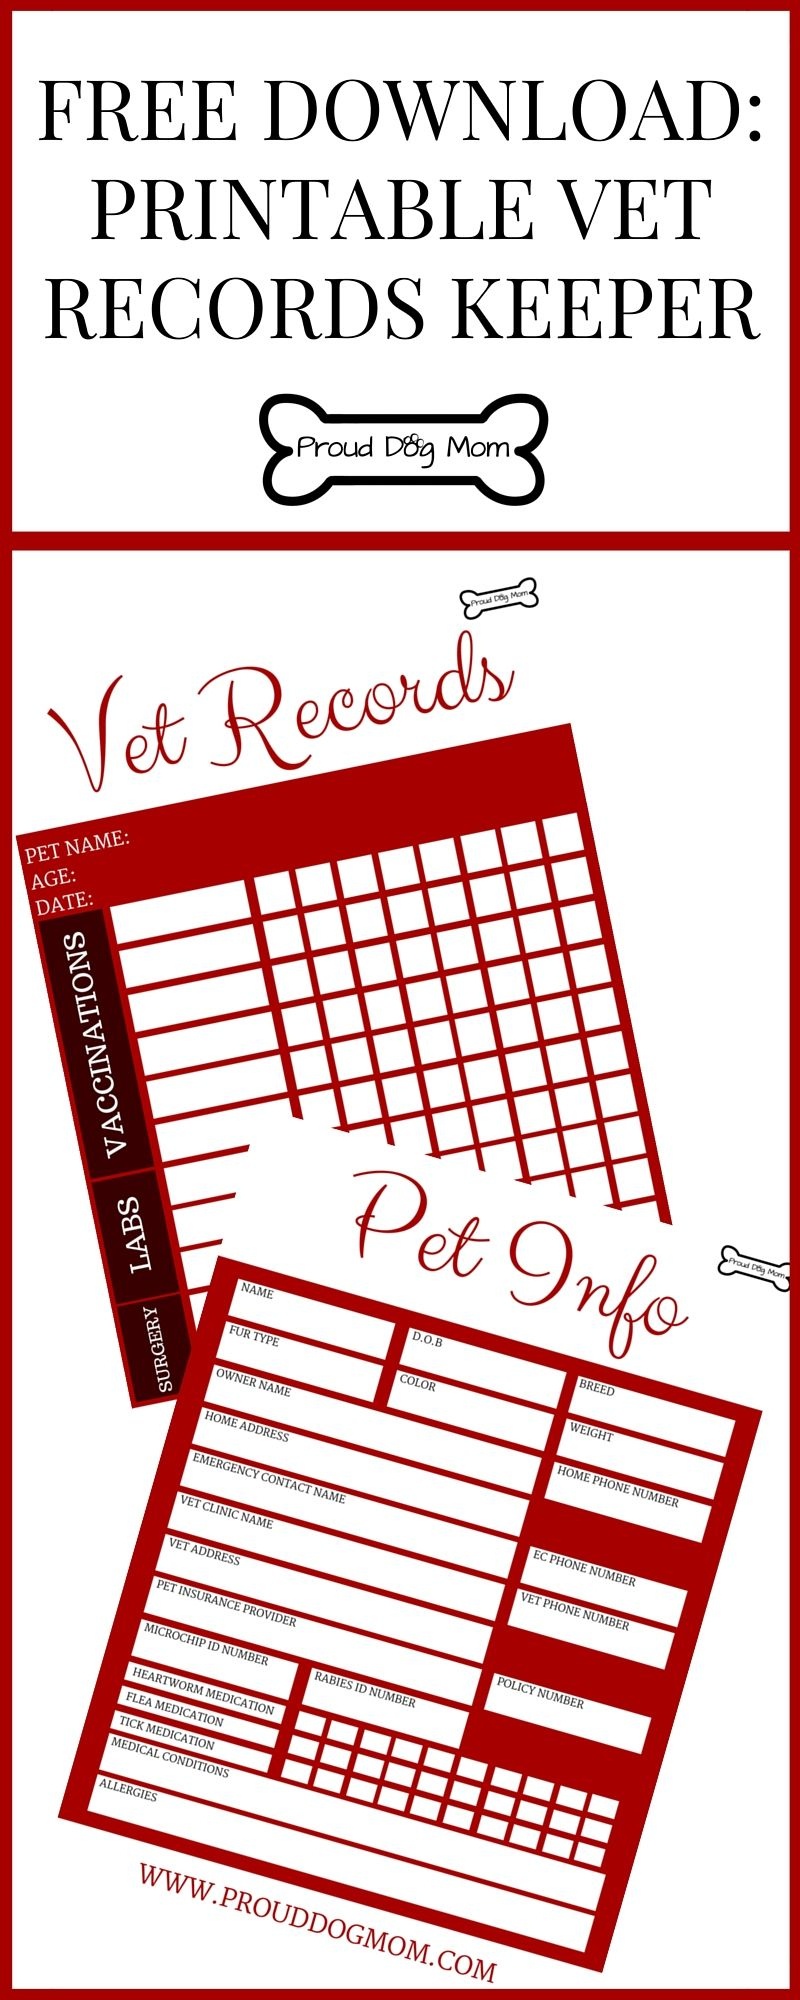 Free Download: Printable Vet Records Keeper | Pets | Dogs, Puppies - Free Printable Pet Health Record